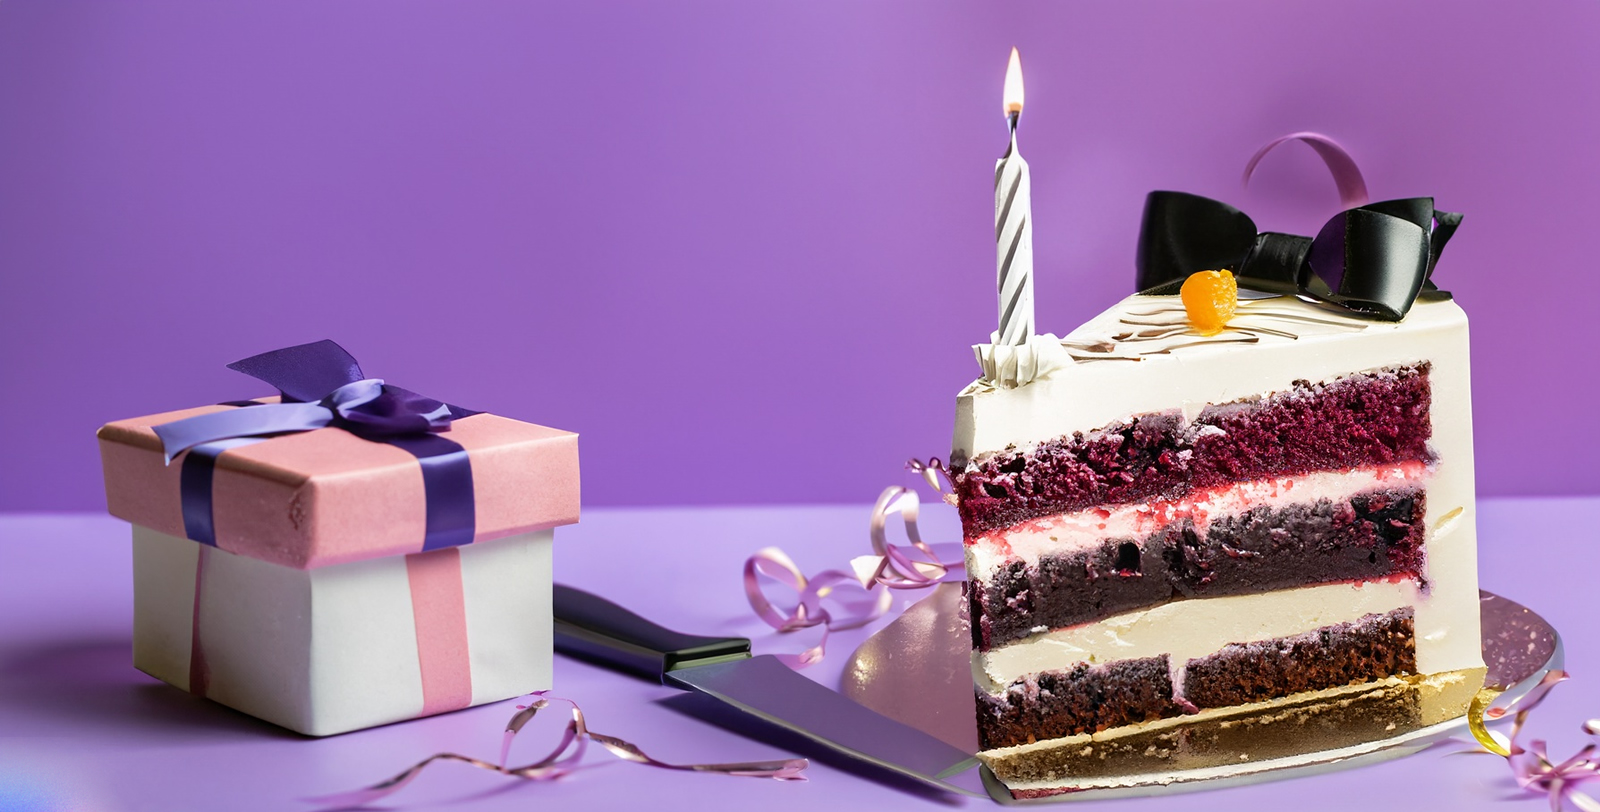 An AI generated image of Tuxedo birthday cake with knife on purple background.